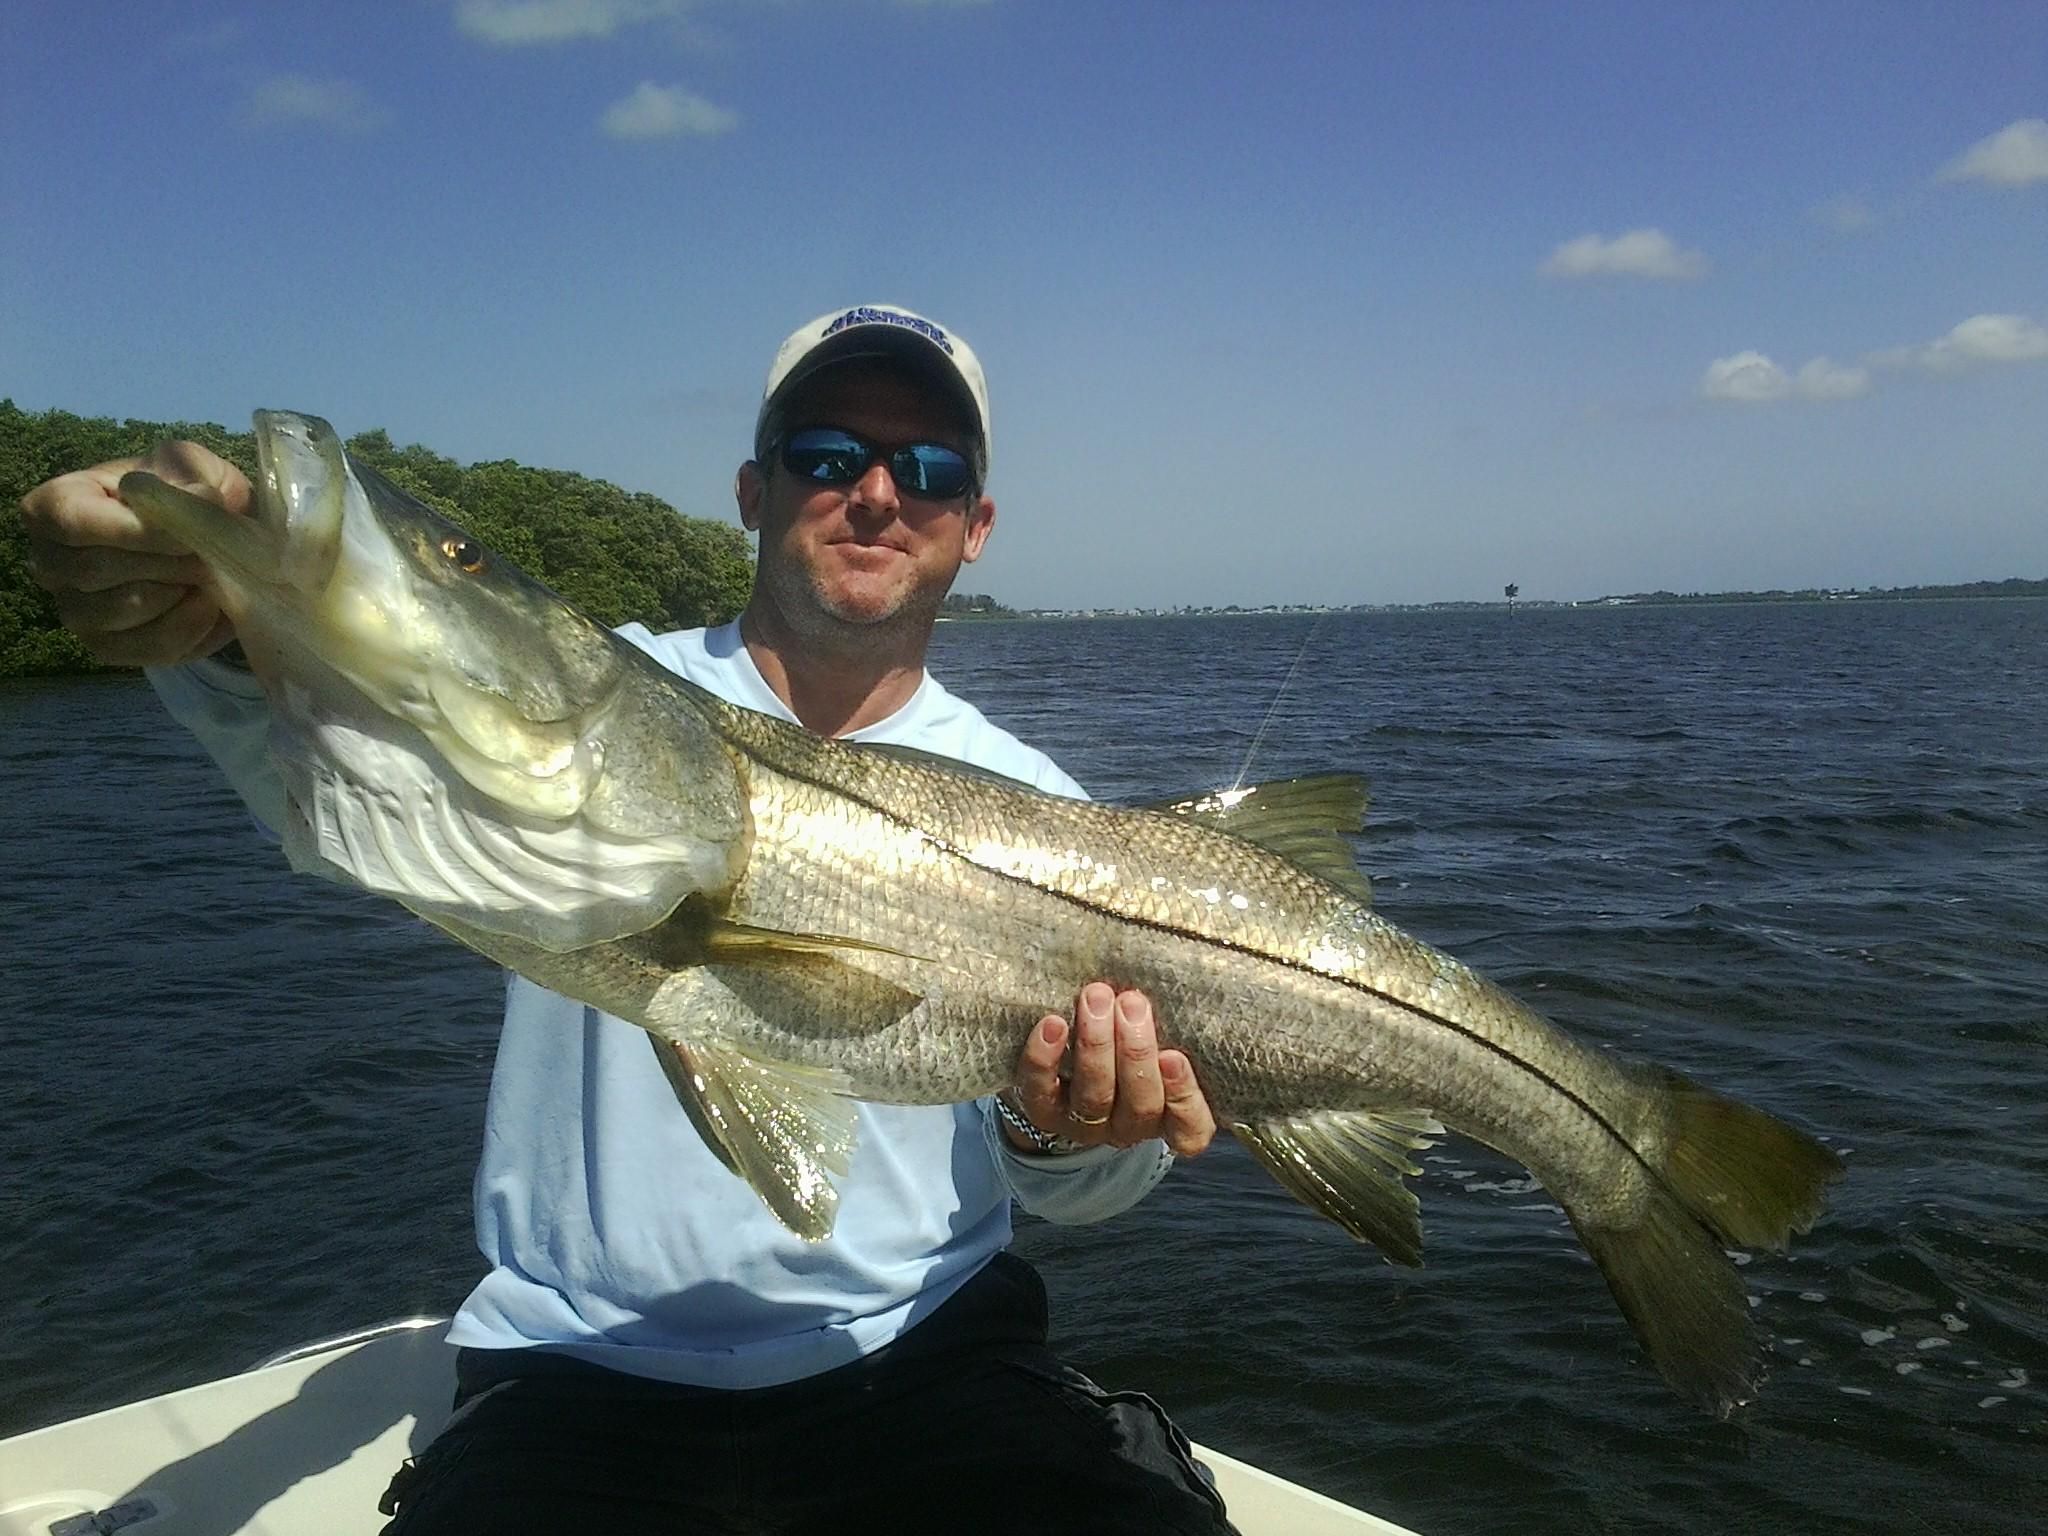 Louisville Fisherman Lands 45 Inch Snook in Lower Tampa Bay